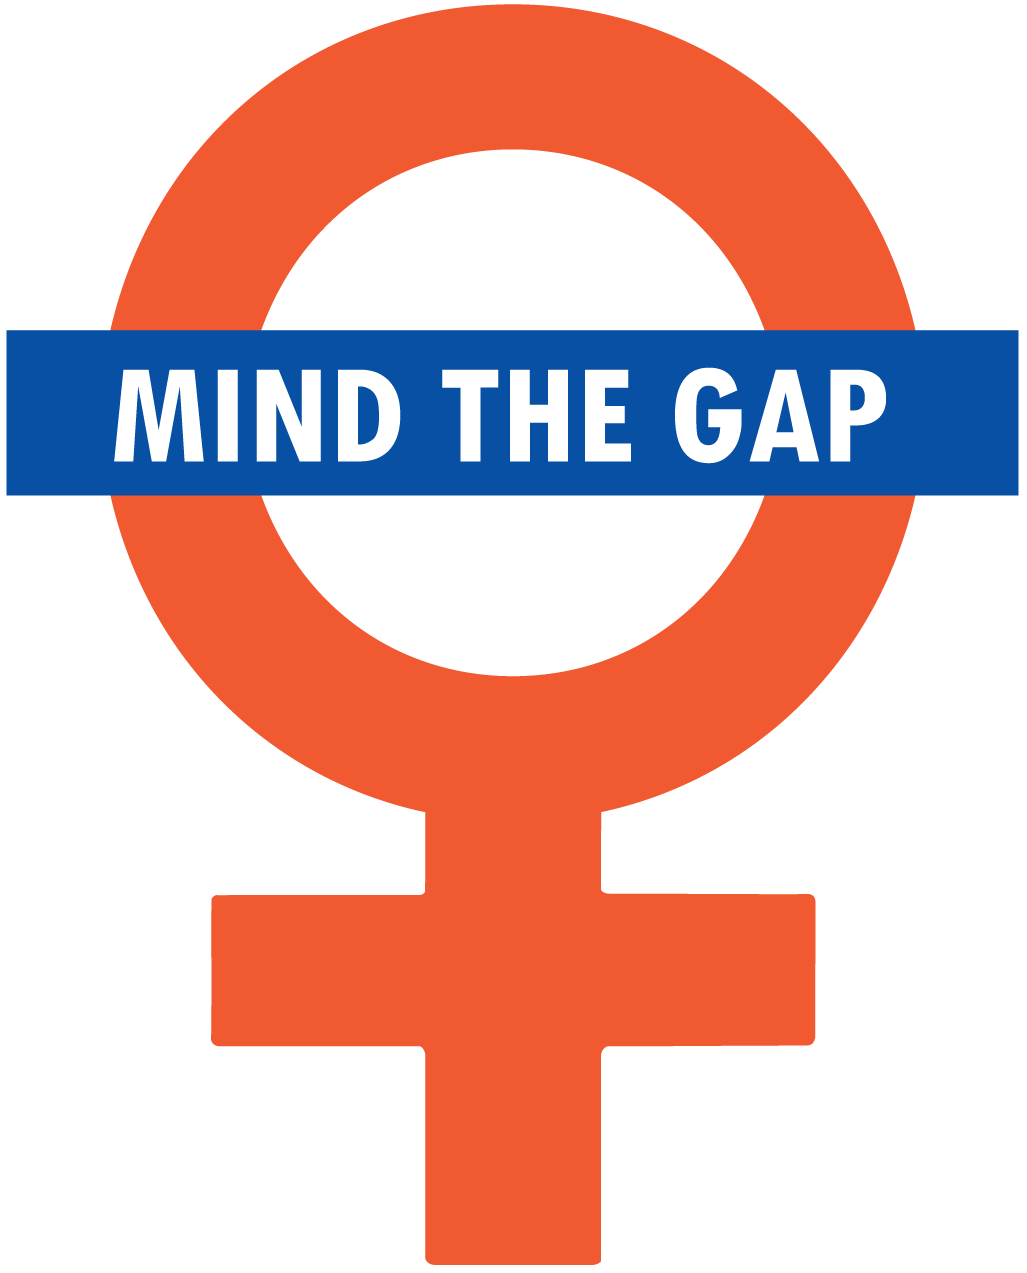 By London Student Feminists [CC BY-SA 3.0 (https://creativecommons.org/licenses/by-sa/3.0)], via Wikimedia Commons